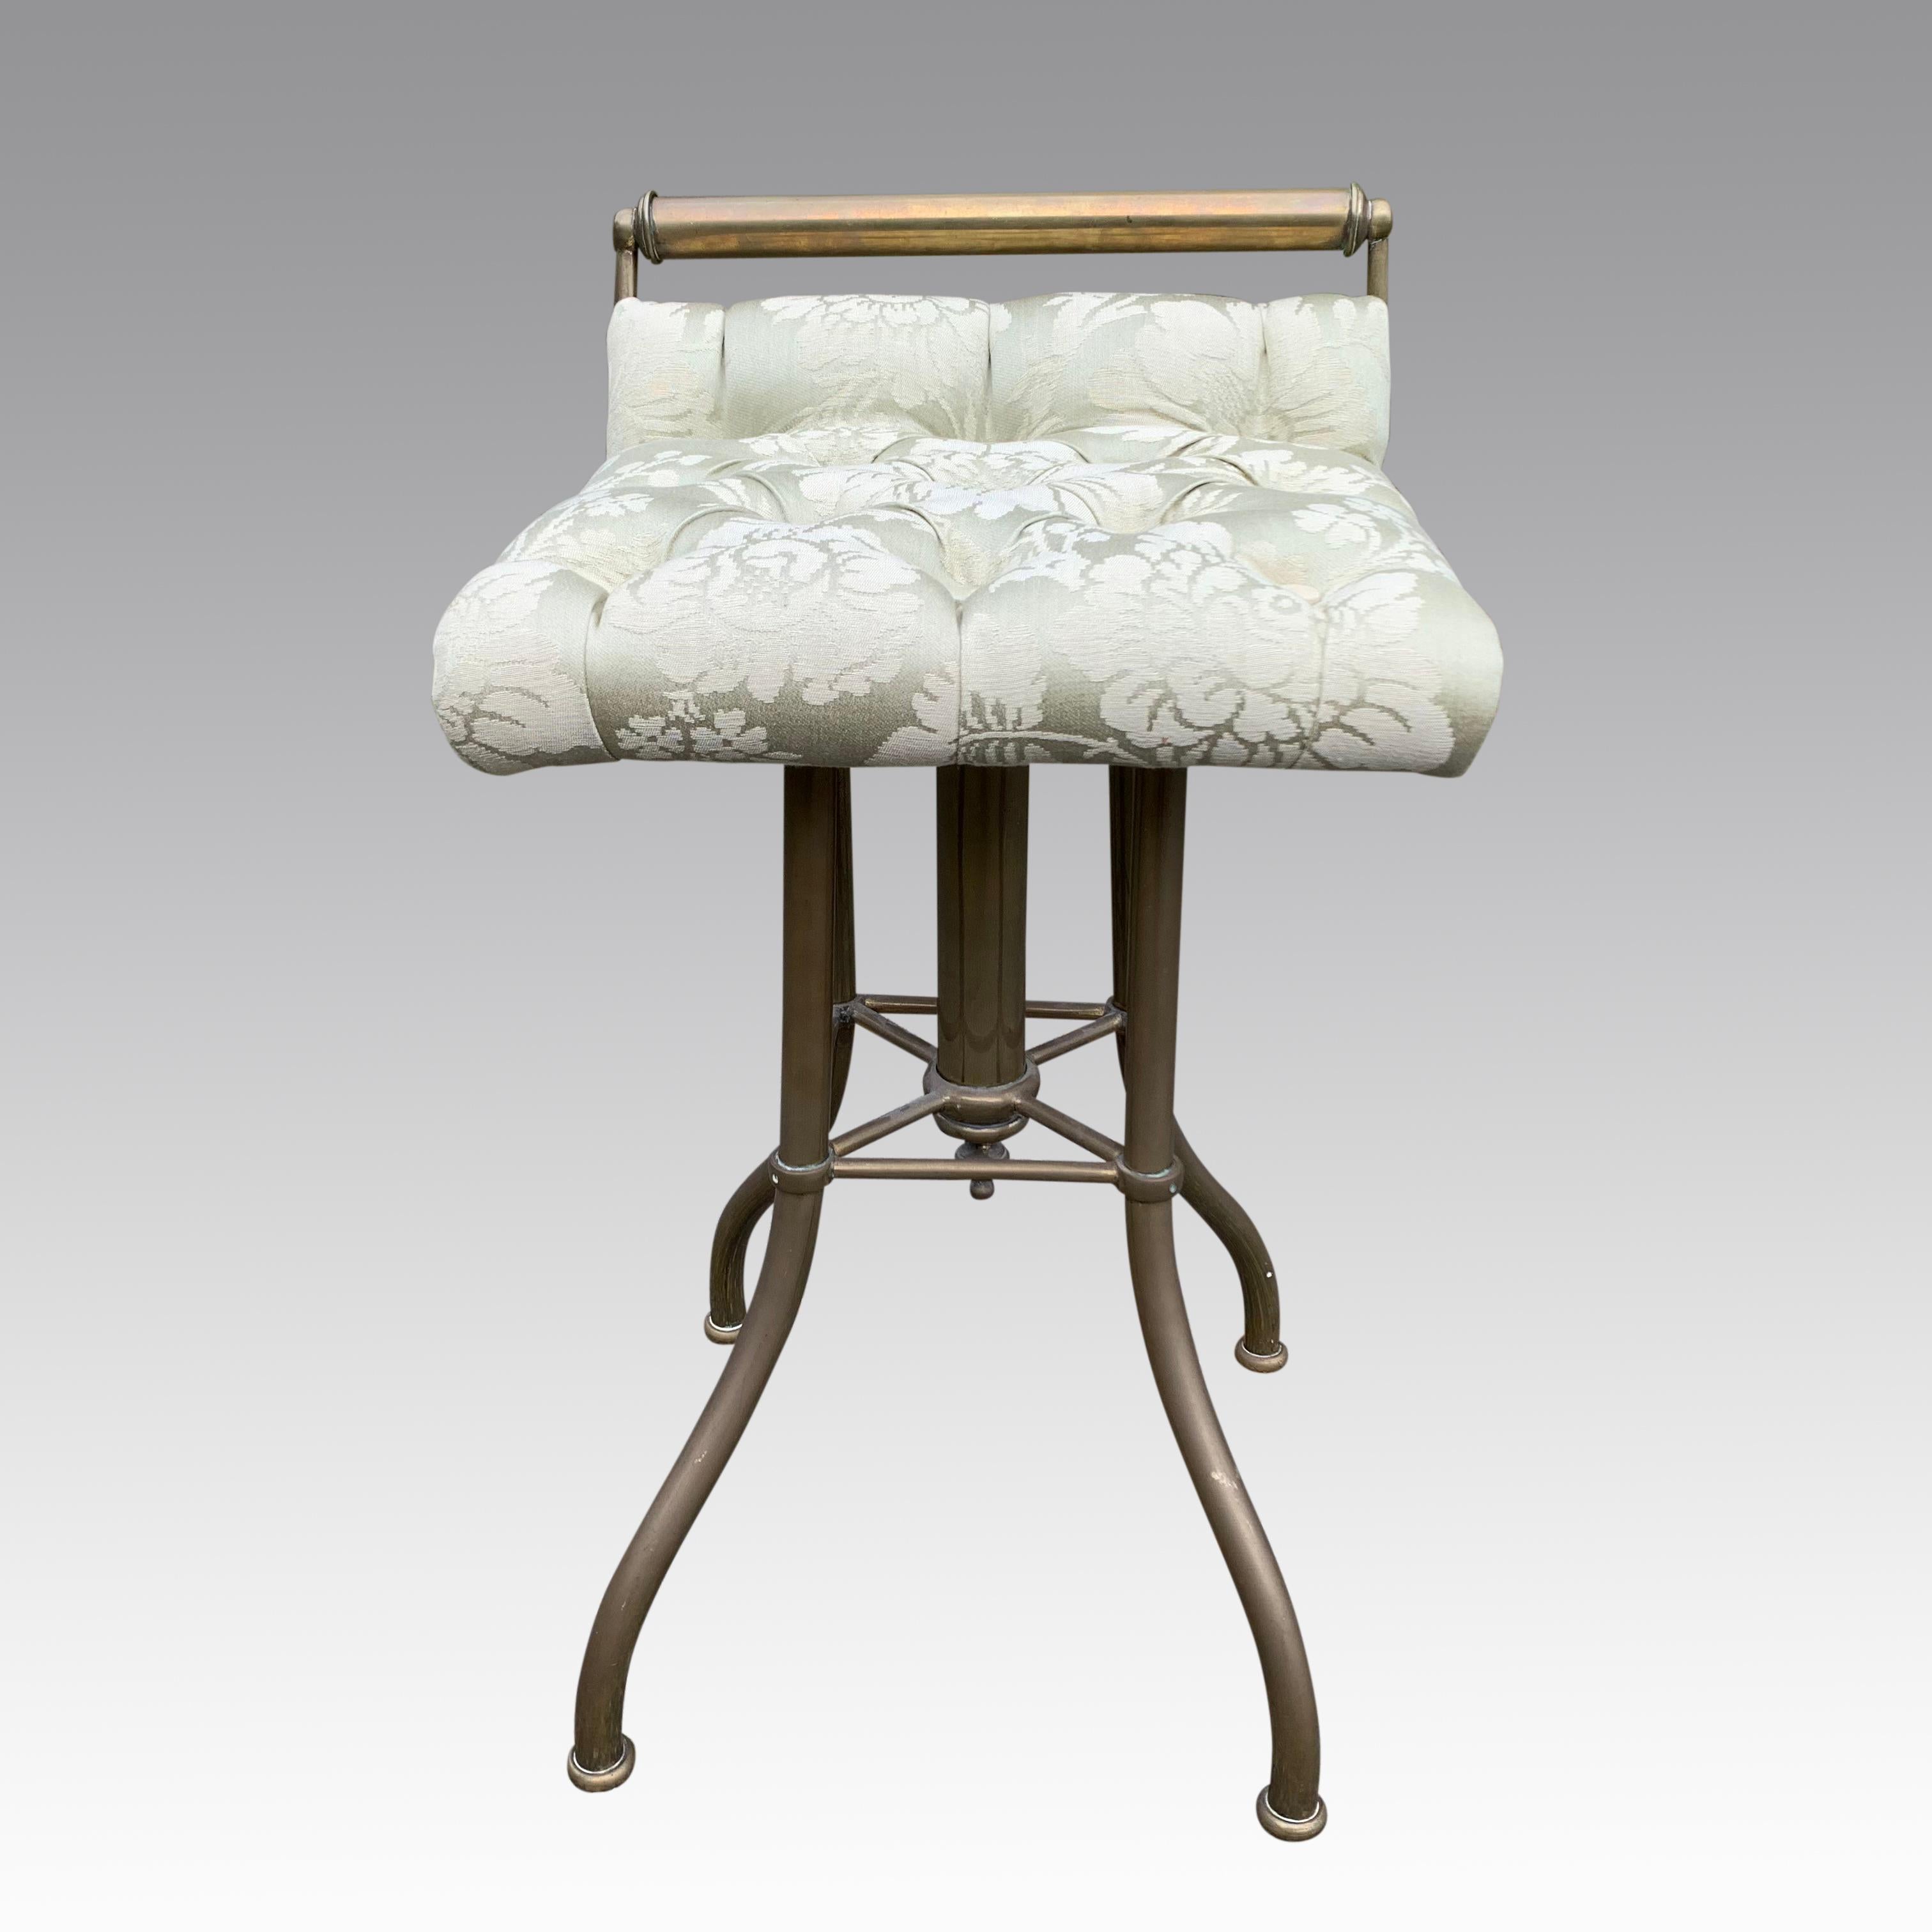 A most inusual and highly decorative brass framed music stool with height adjustable upholstered seat. Beautifully re-upholstered in a pale green, buttoned damask fabric. In excellent original condition.
Measures: Height from 56cms to 66cms.